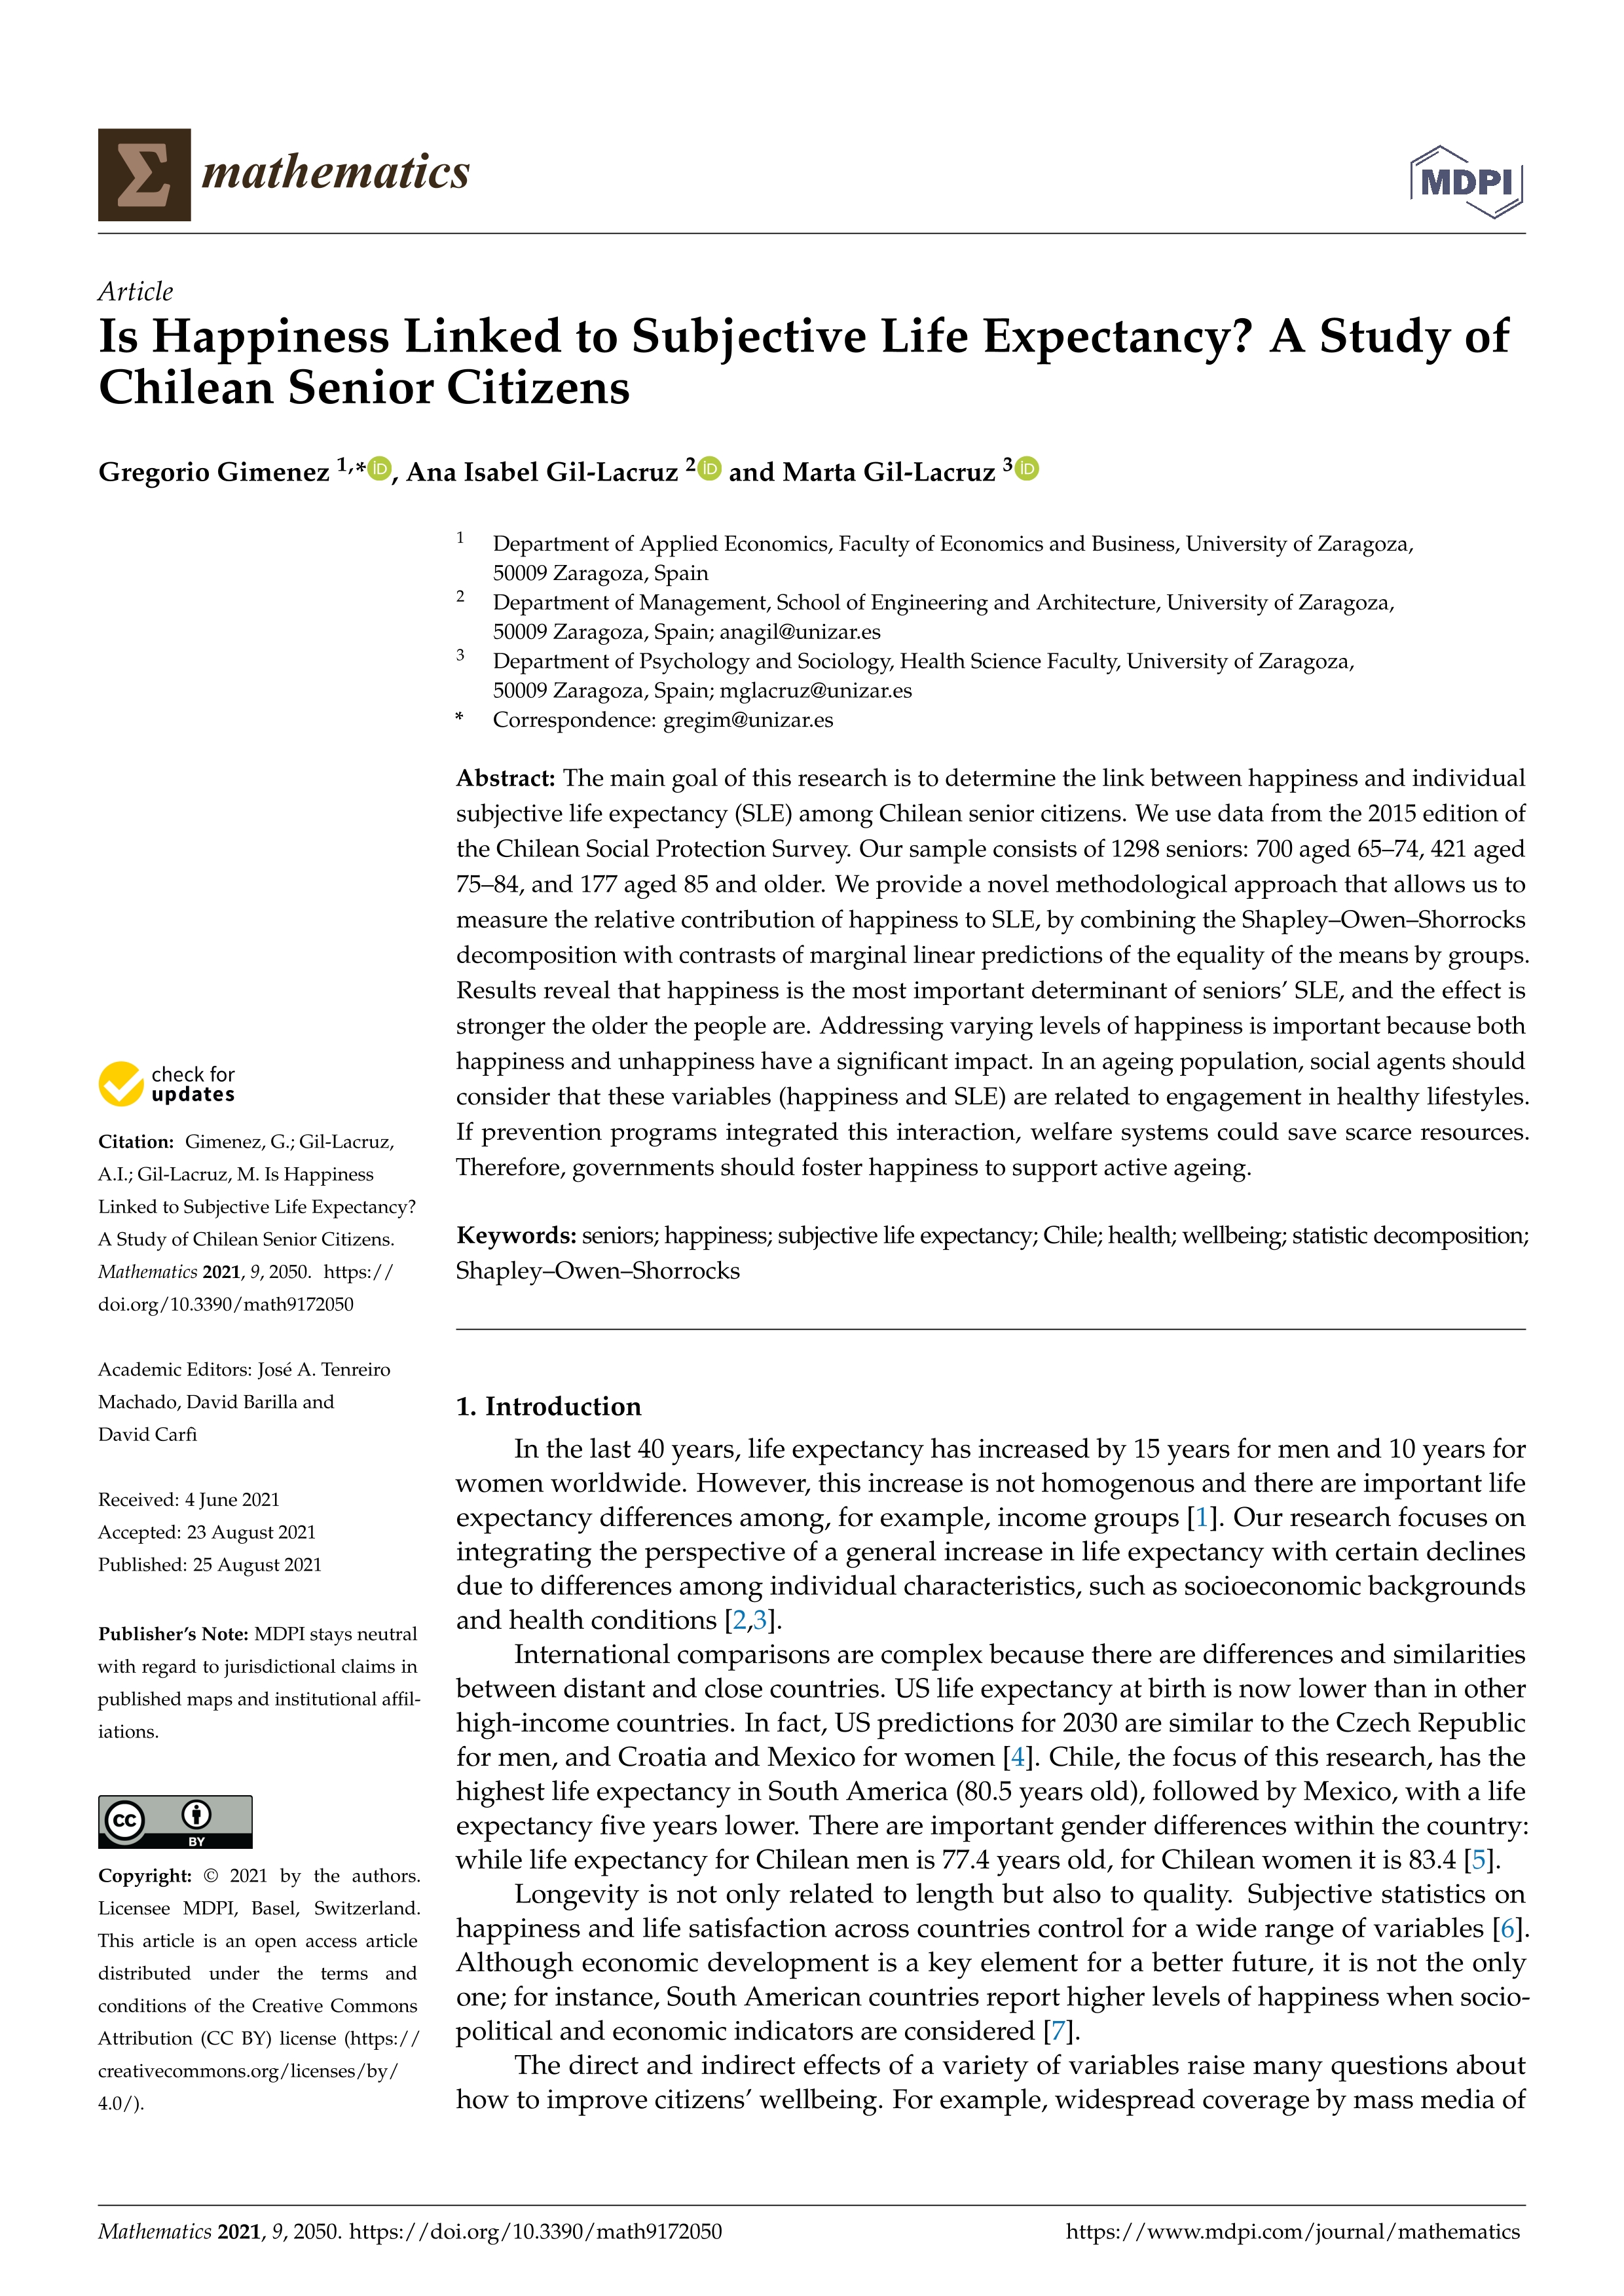 Is happiness linked to subjective life expectancy?. A study of chilean senior citizens